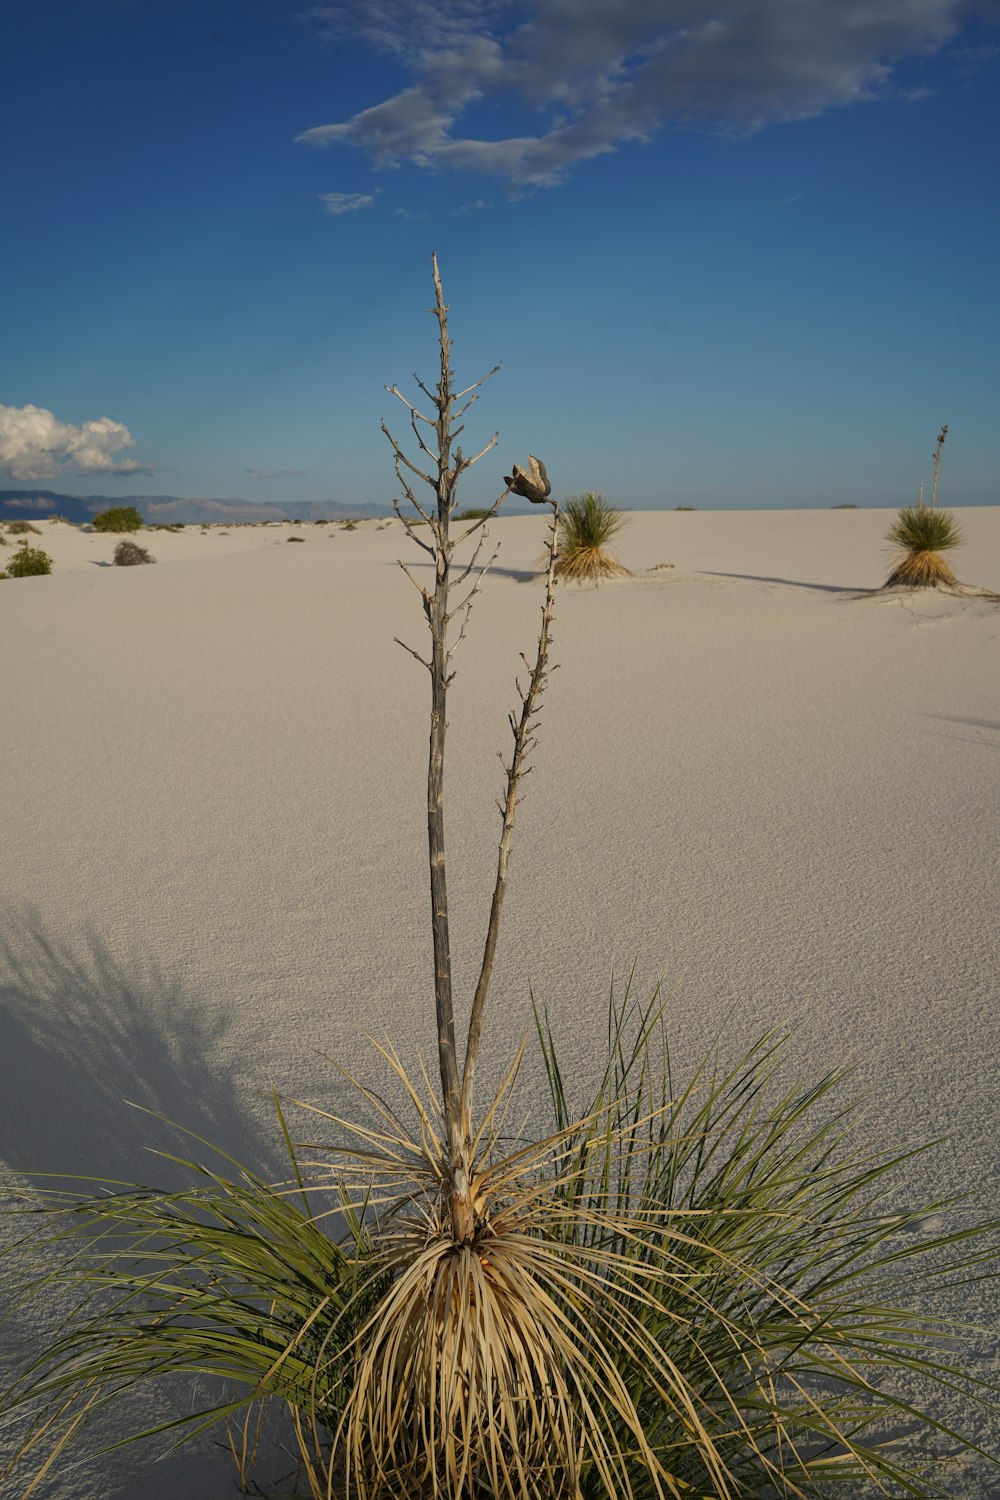 a small tree in the middle of a desert